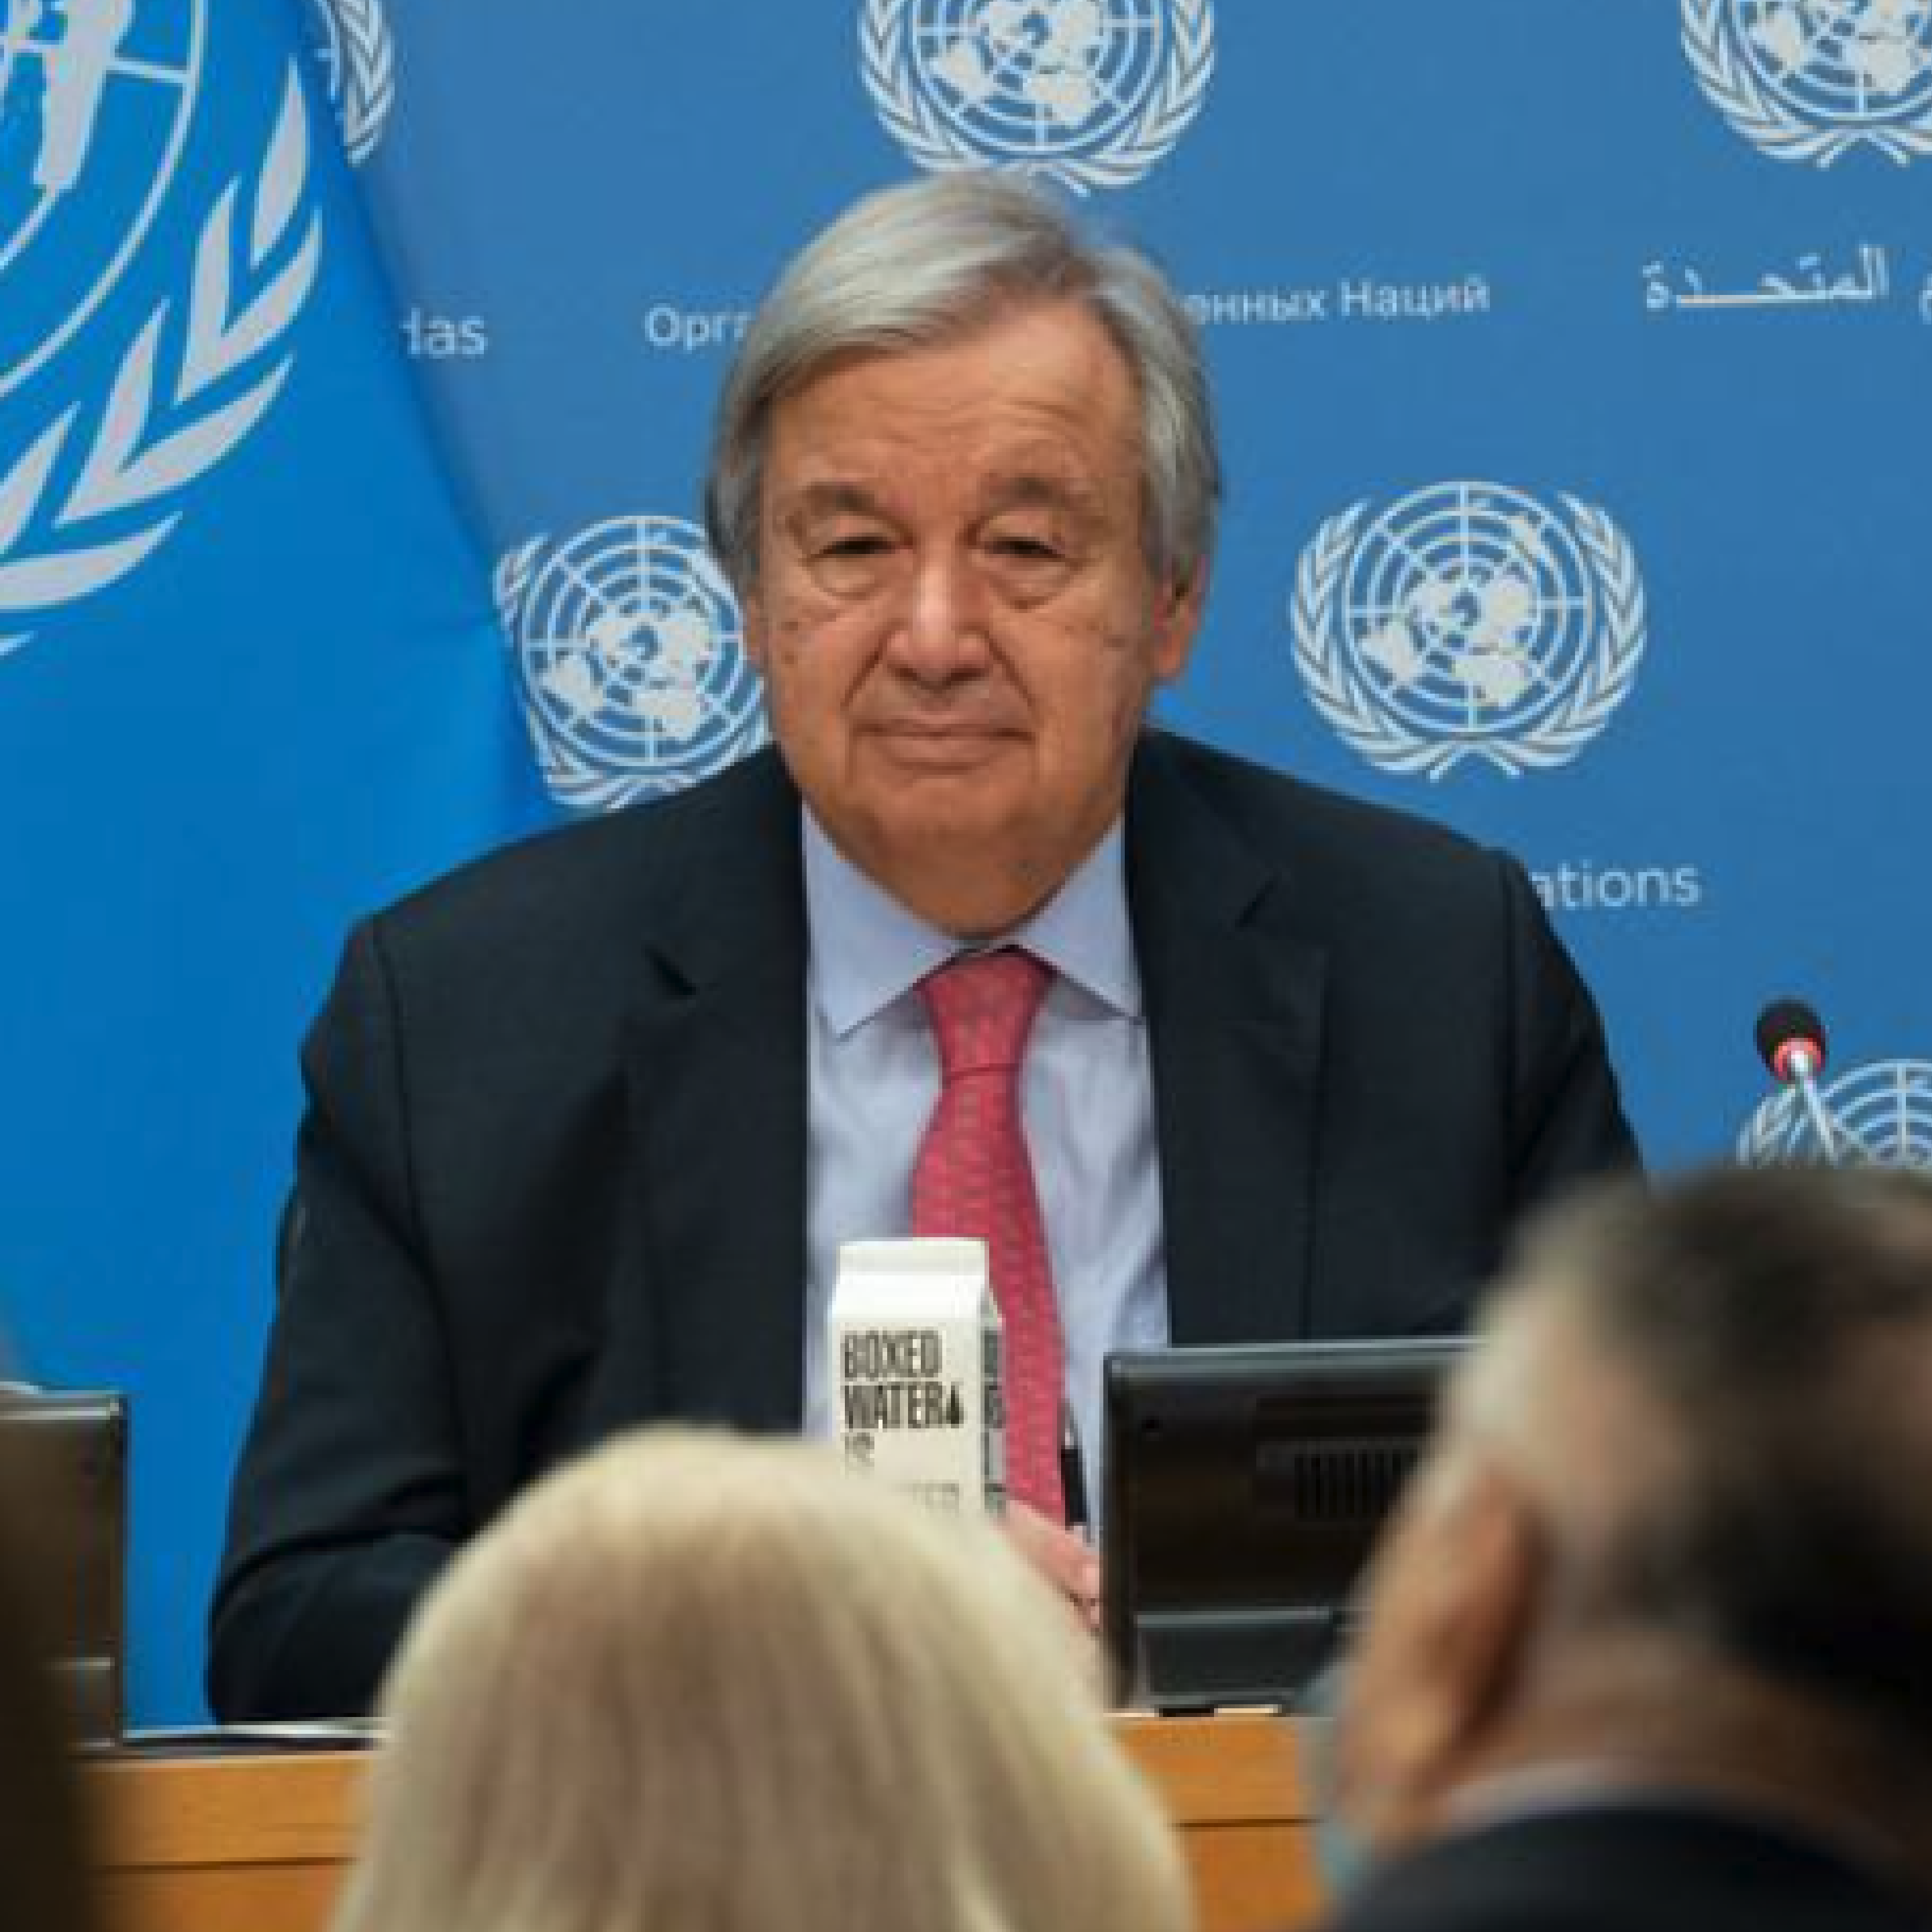 Secretary-General António Guterres briefs the media ahead of the UN General Assembly High-Level week.